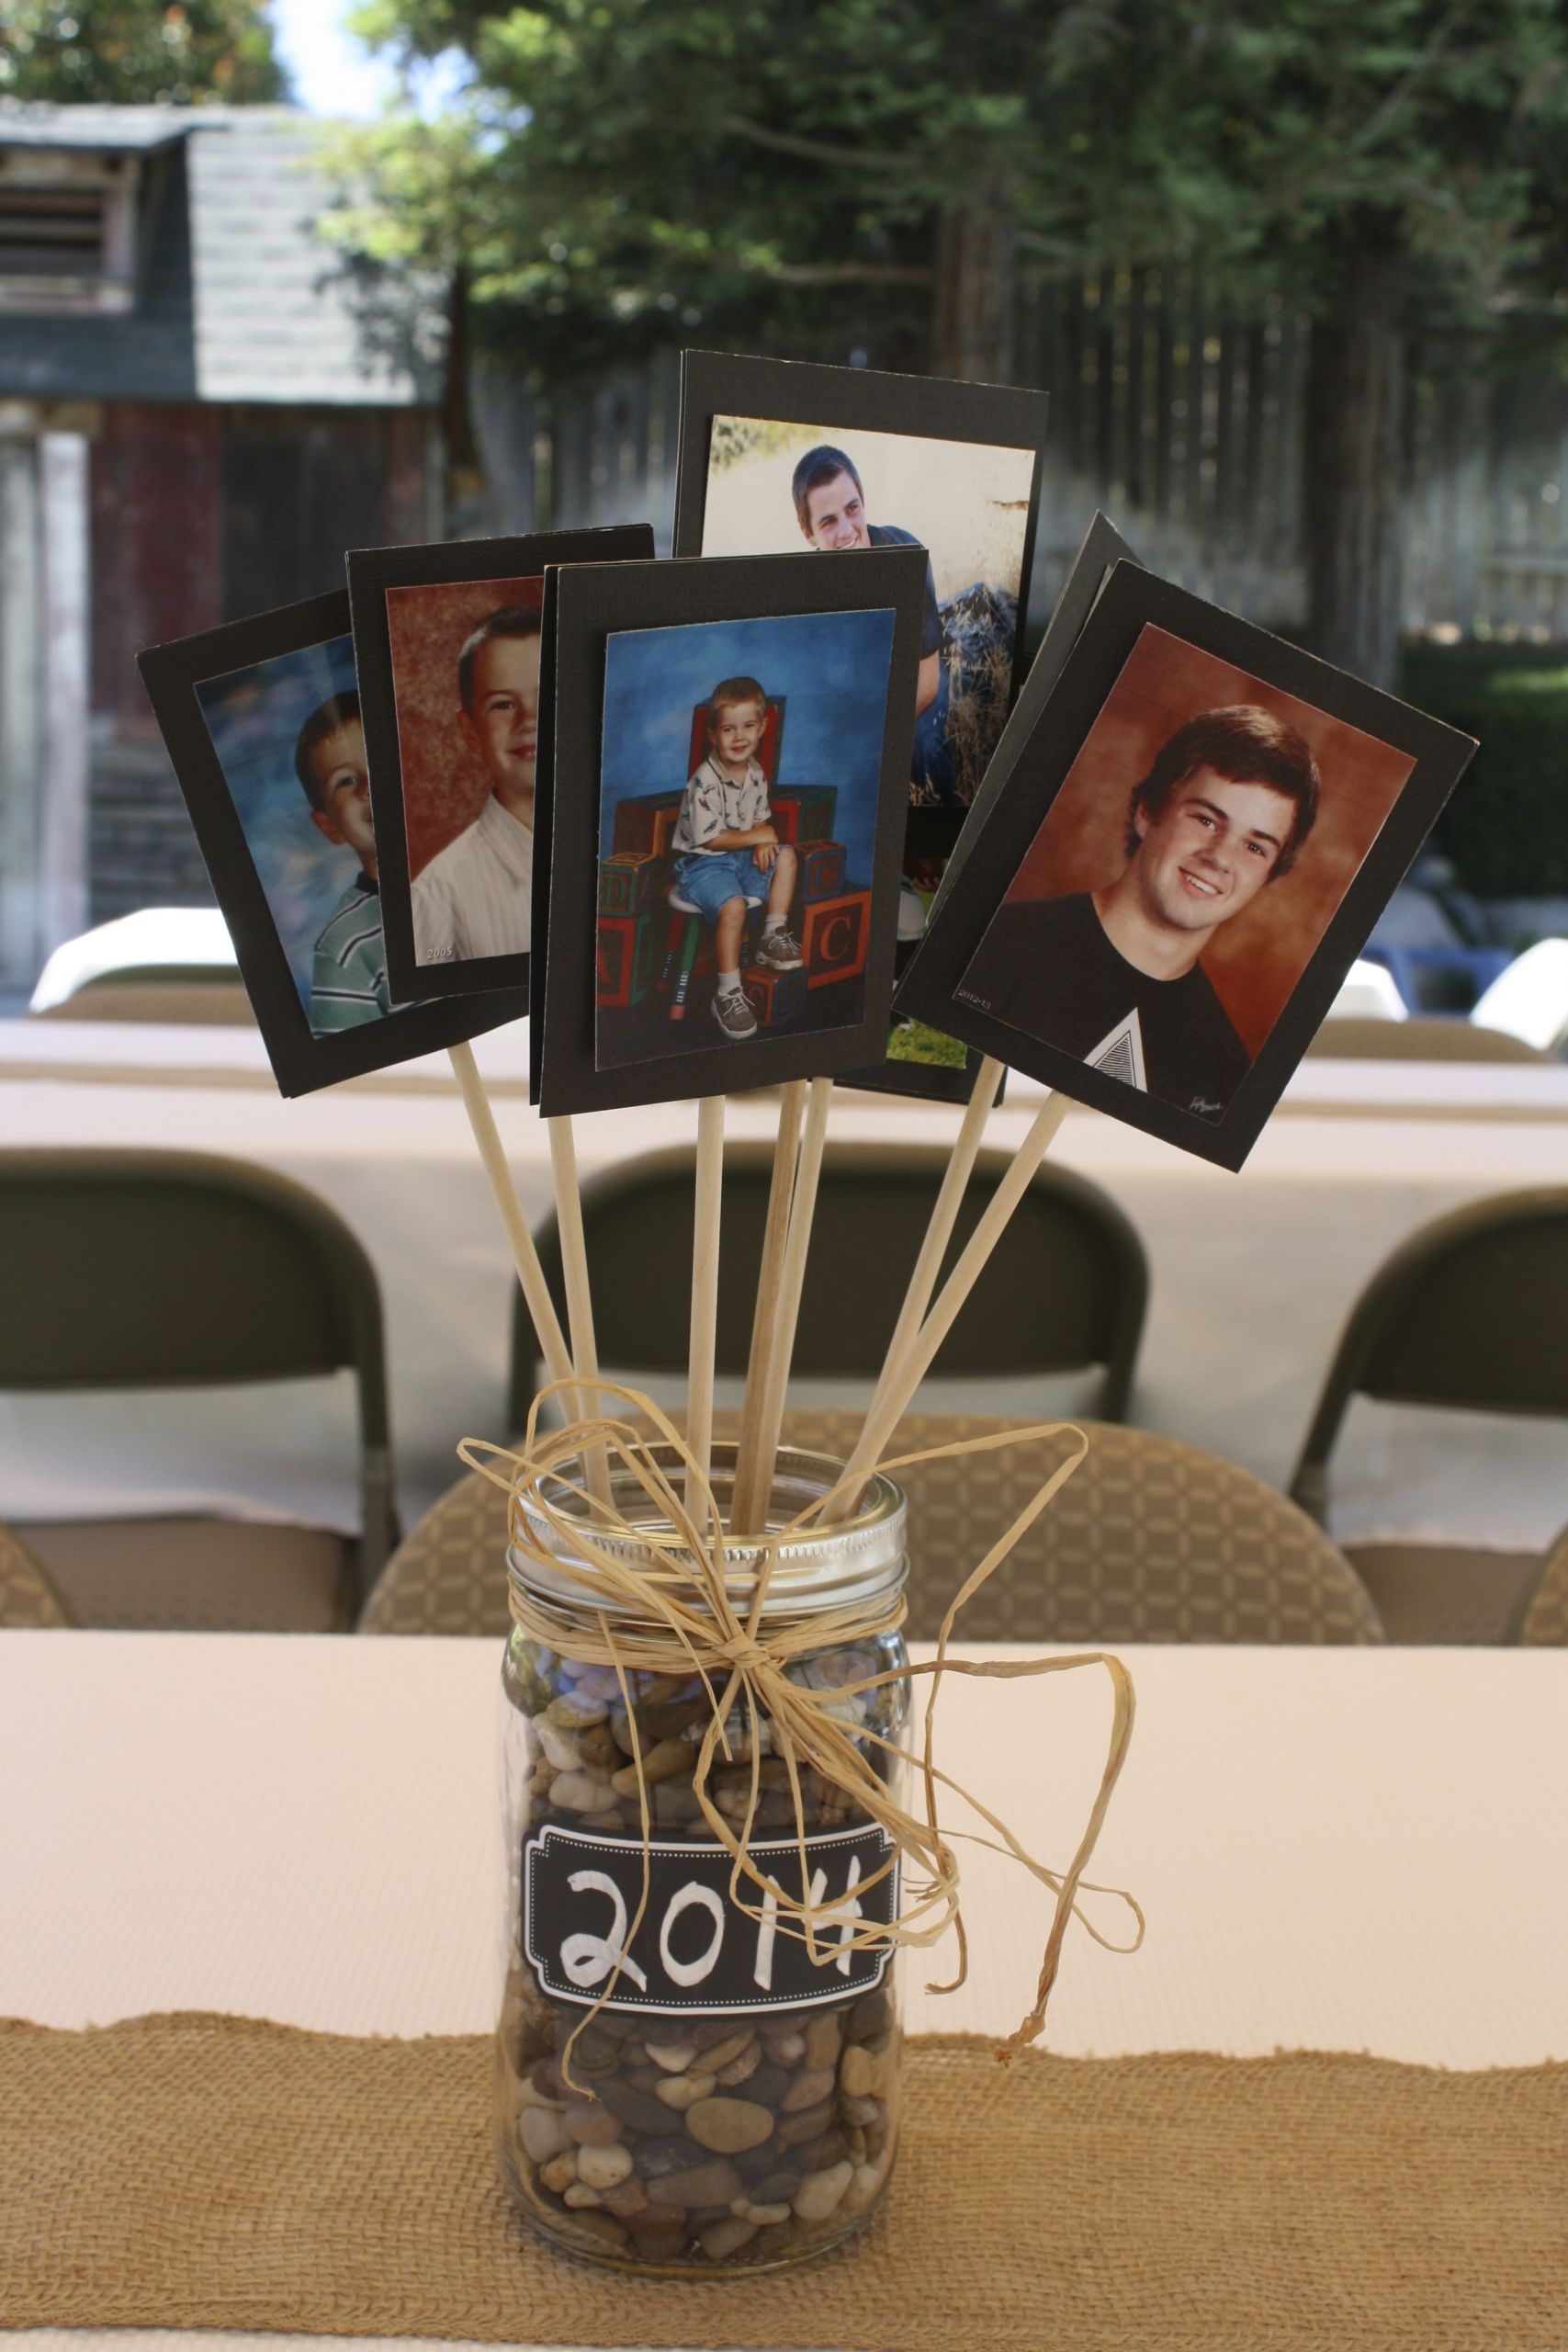 College Graduation Party Ideas For Guys
 Centerpiece for tables at a graduation party Good for